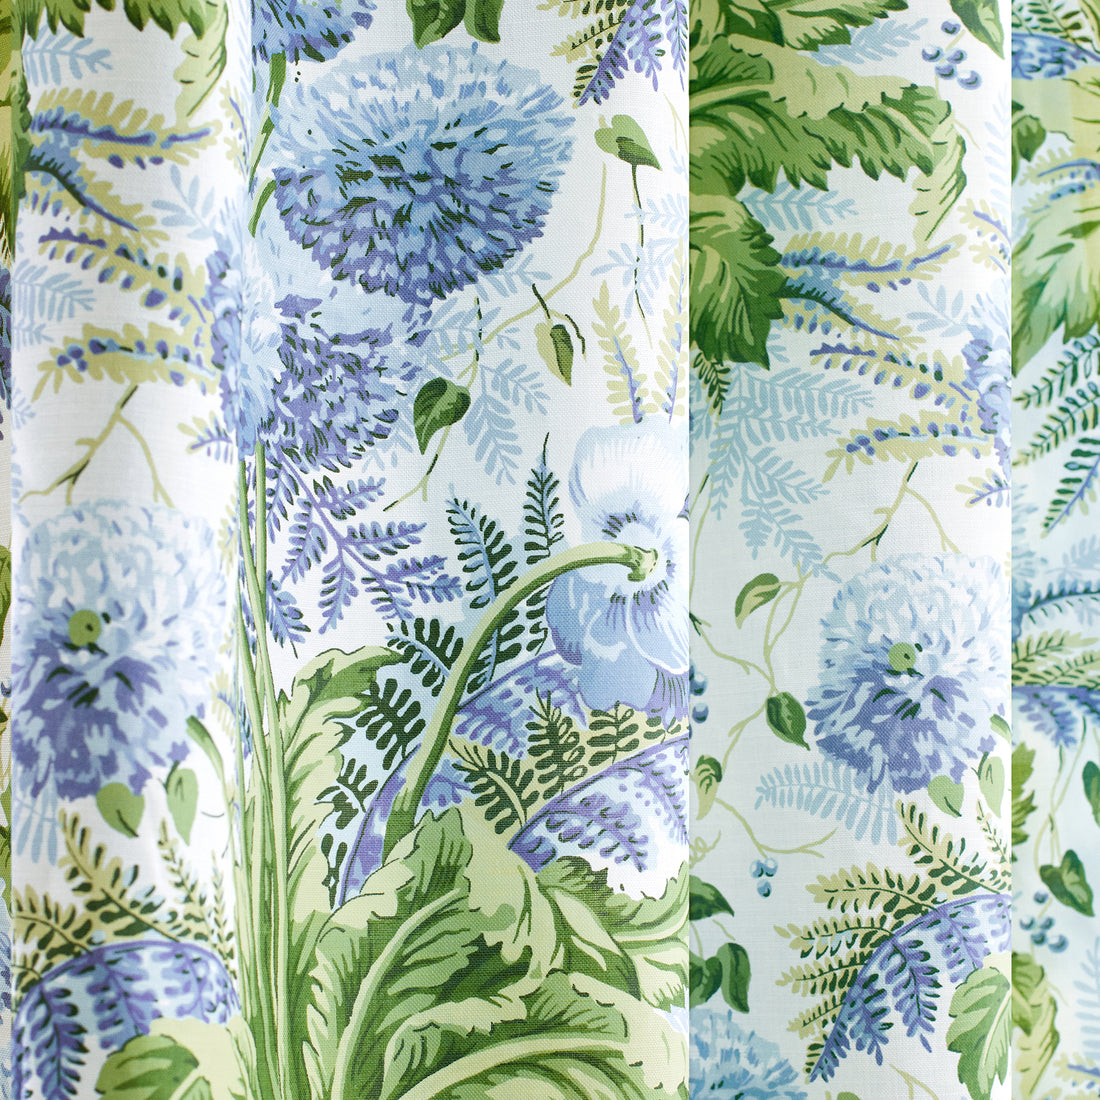 Detail on Dahlia printed fabric in Sky on White, Anna French pattern number AF24535